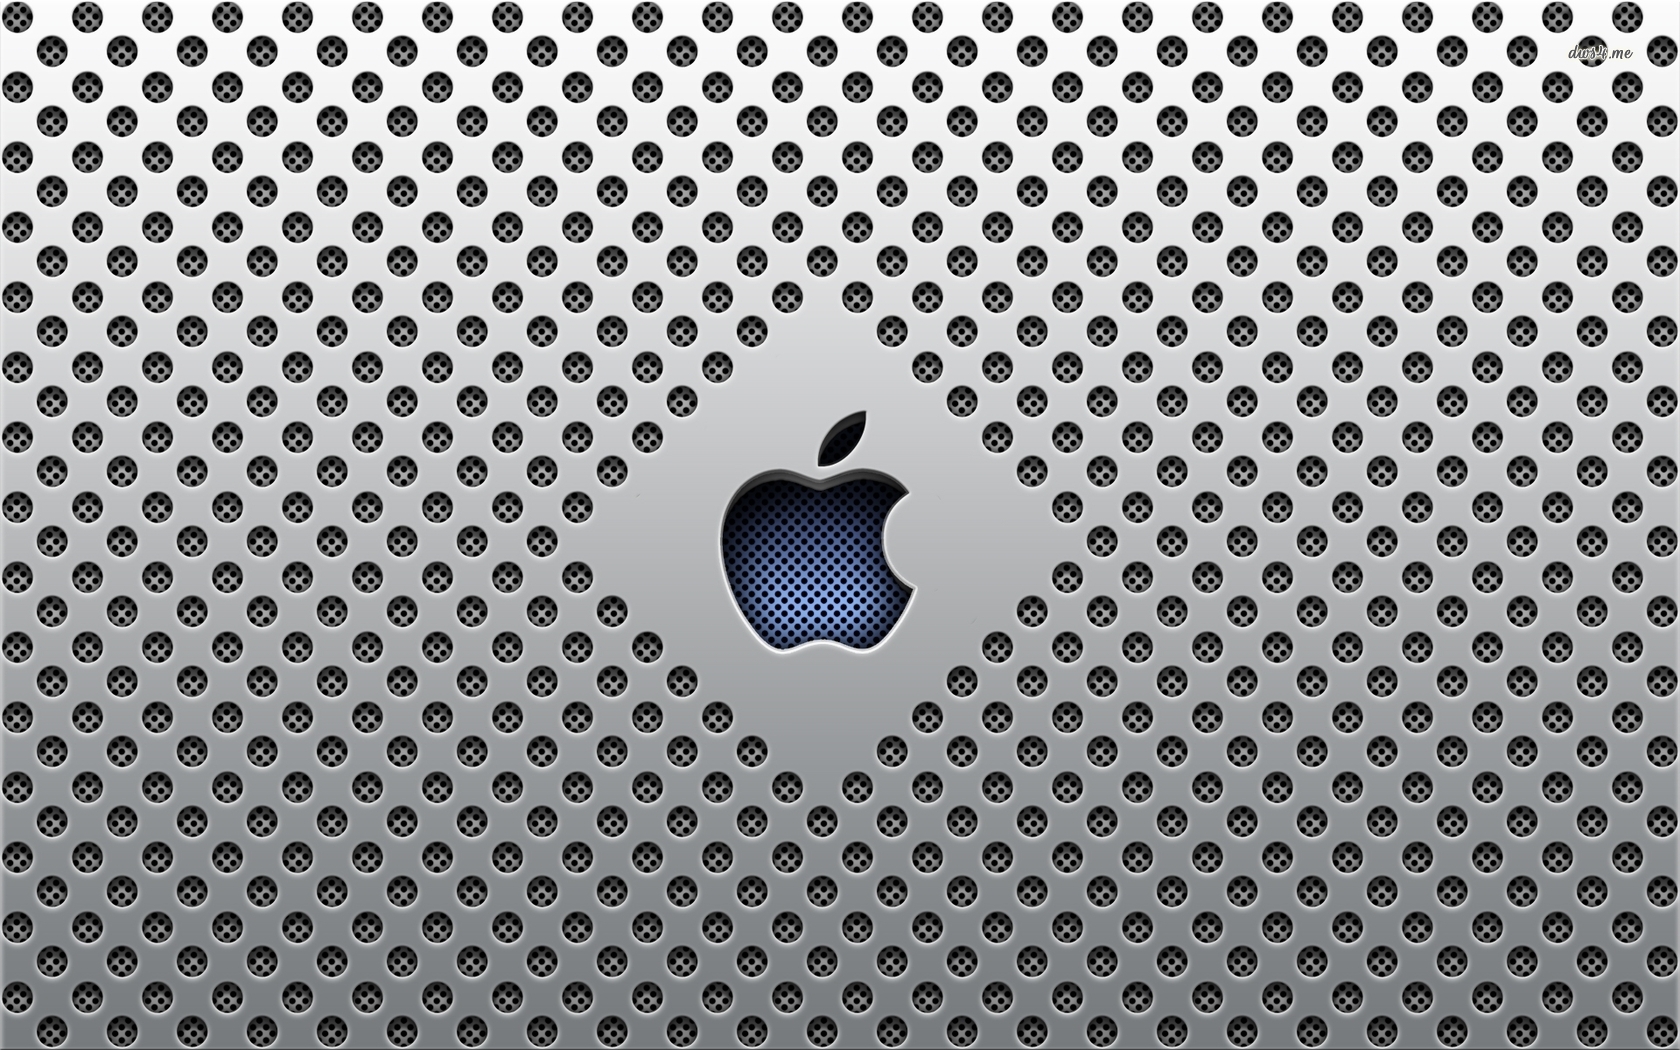 Apple Logo Wallpapers HD grey gray dotted